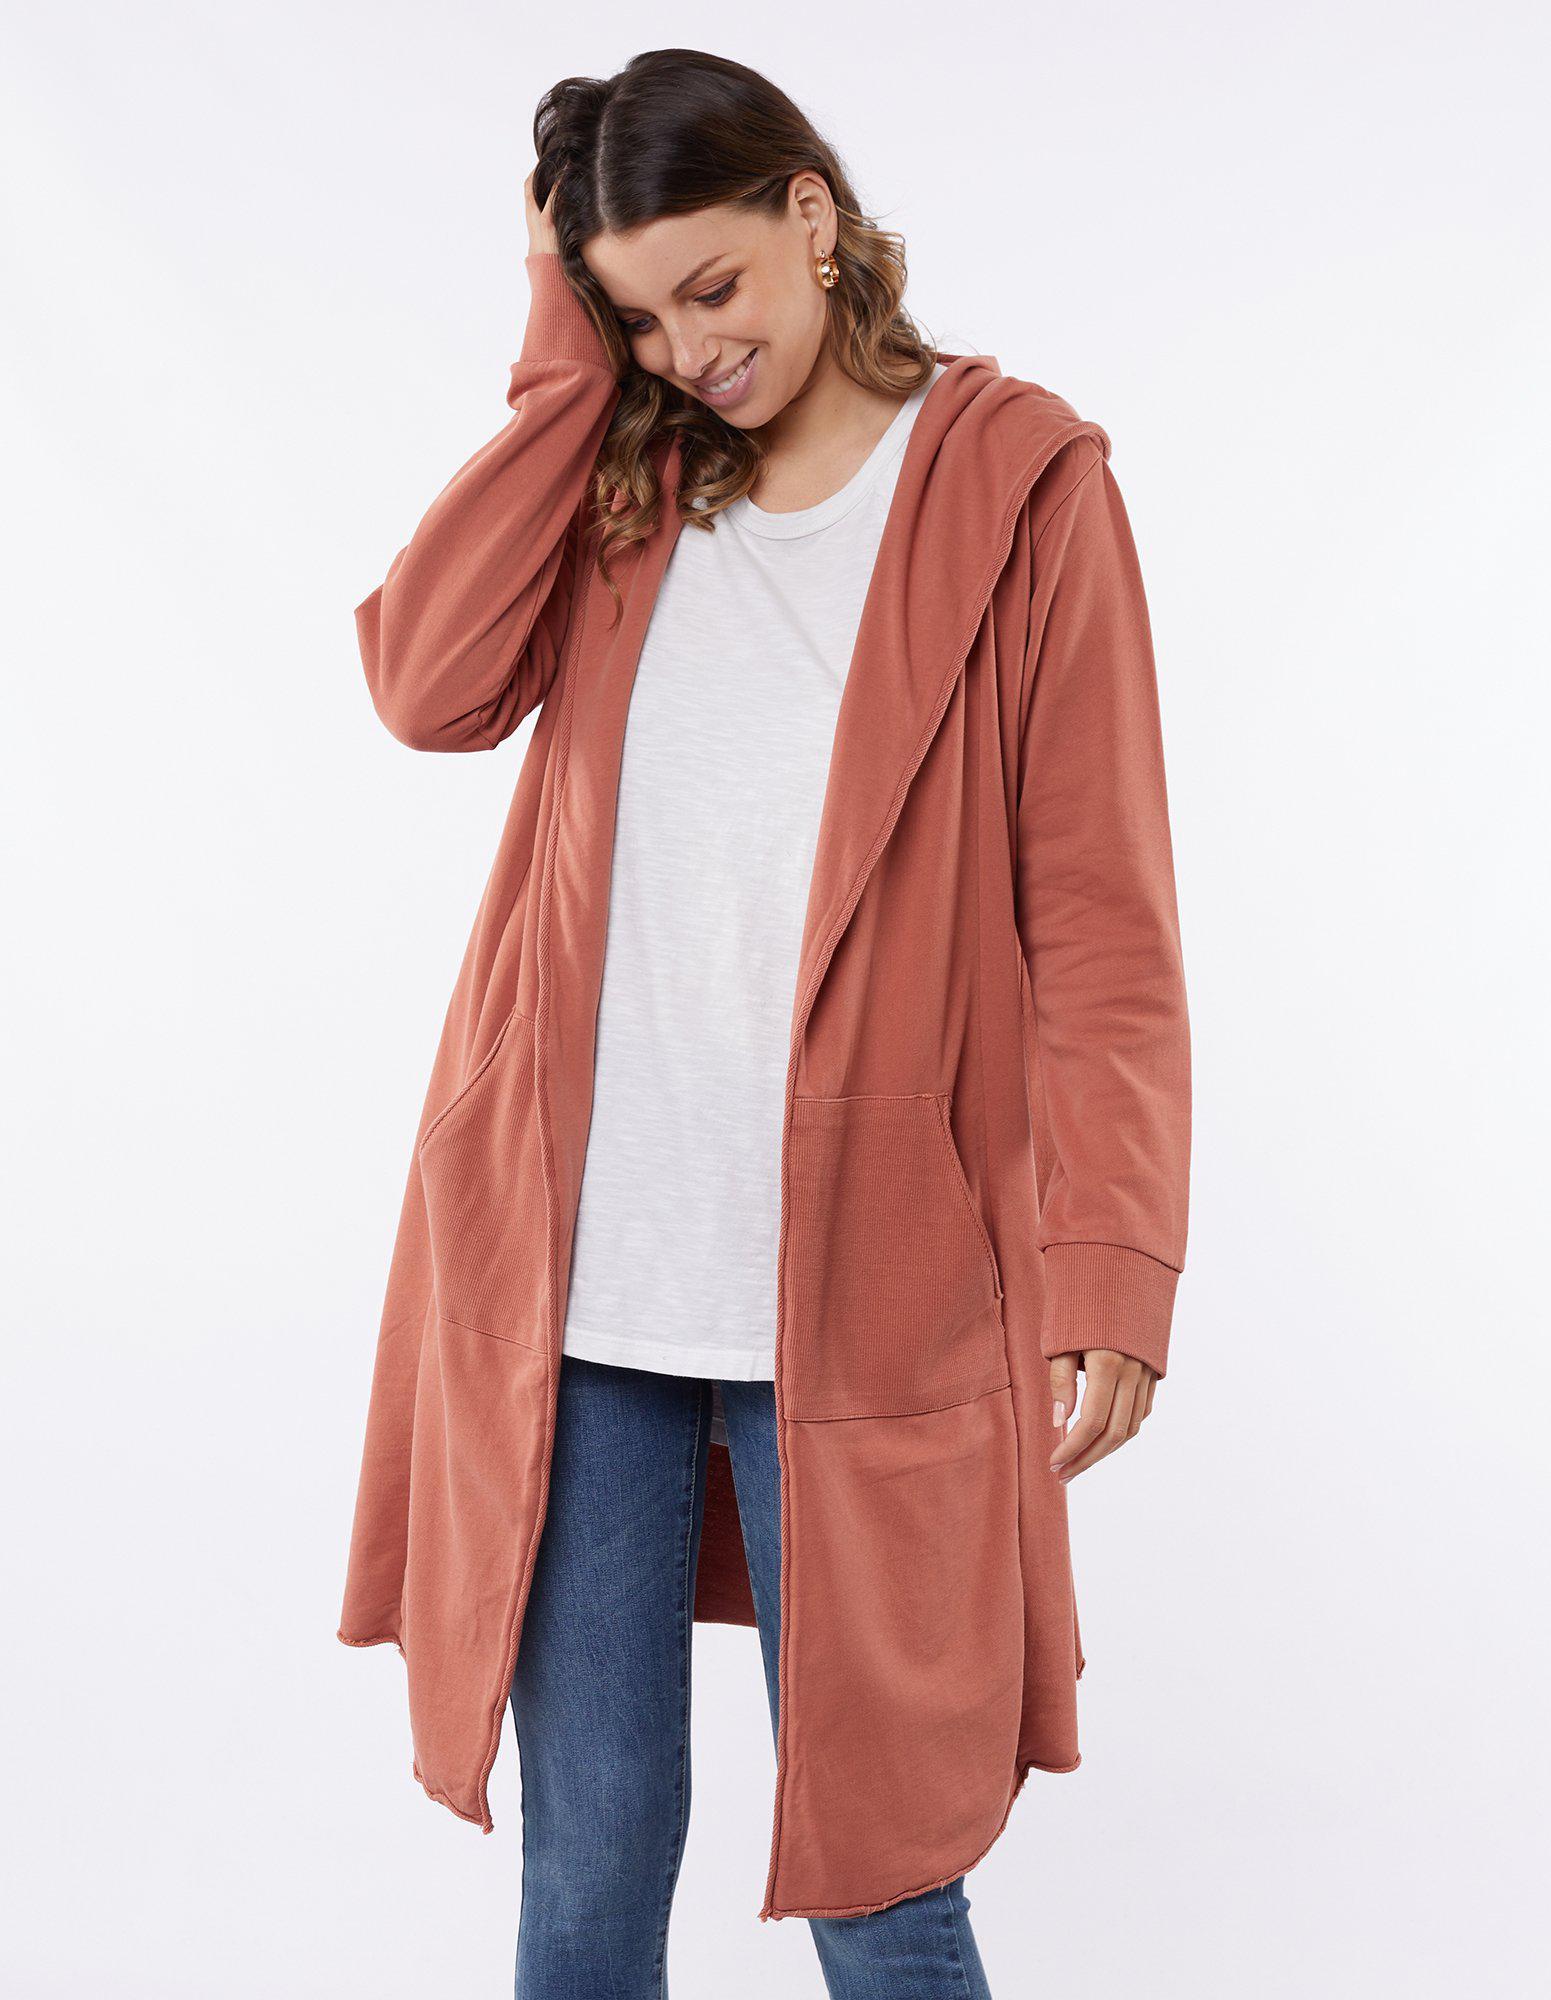 Naomi Hooded Cardi - Copper - Foxwood - FUDGE Gifts Home Lifestyle